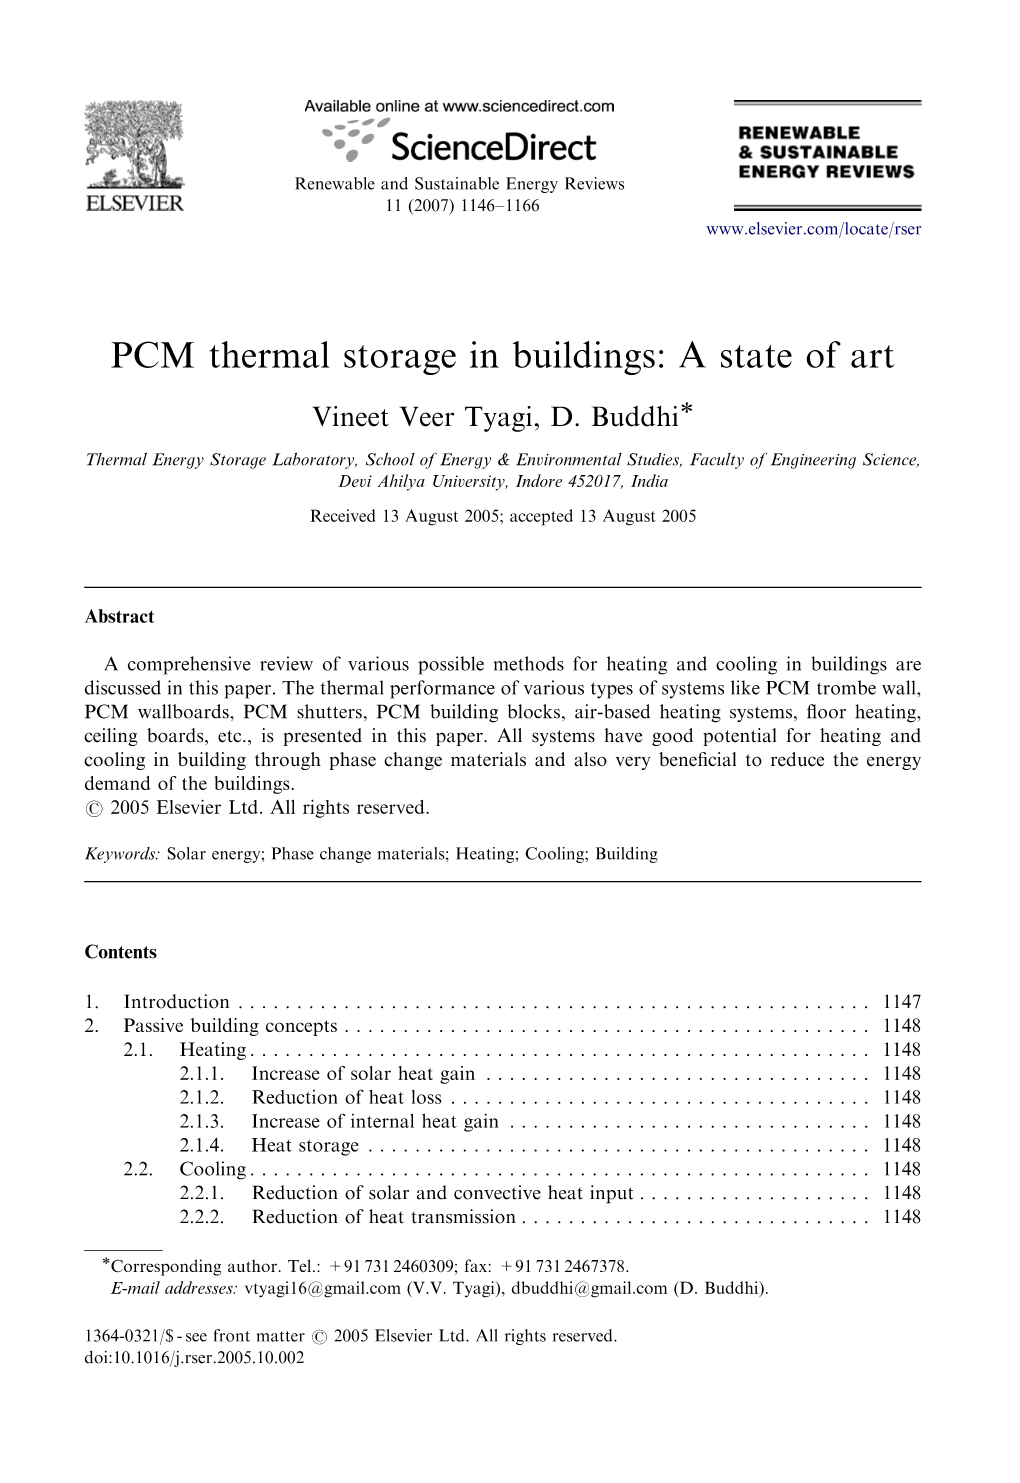 PCM Thermal Storage in Buildings: a State of Art